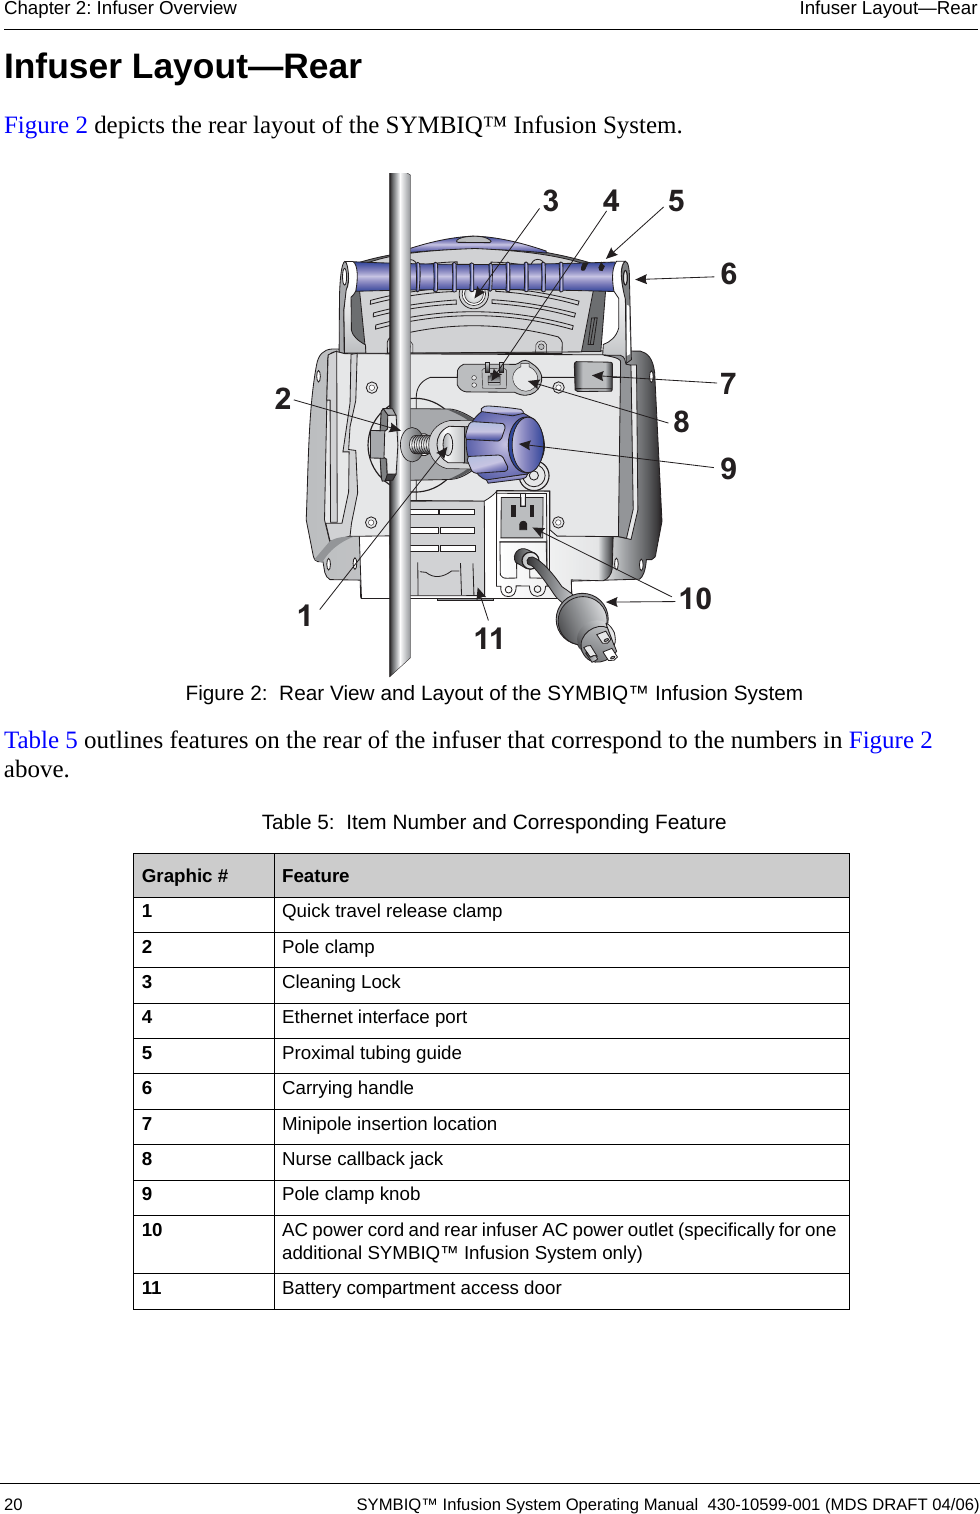  20 SYMBIQ™ Infusion System Operating Manual  430-10599-001 (MDS DRAFT 04/06)Chapter 2: Infuser Overview Infuser Layout—RearInfuser Layout—RearFigure 2 depicts the rear layout of the SYMBIQ™ Infusion System. Figure 2:  Rear View and Layout of the SYMBIQ™ Infusion SystemTable 5 outlines features on the rear of the infuser that correspond to the numbers in Figure 2 above. Table 5:  Item Number and Corresponding FeatureGraphic # Feature1Quick travel release clamp2Pole clamp3Cleaning Lock4Ethernet interface port5Proximal tubing guide6Carrying handle7Minipole insertion location 8Nurse callback jack9Pole clamp knob10 AC power cord and rear infuser AC power outlet (specifically for one additional SYMBIQ™ Infusion System only)11 Battery compartment access door6349521111087